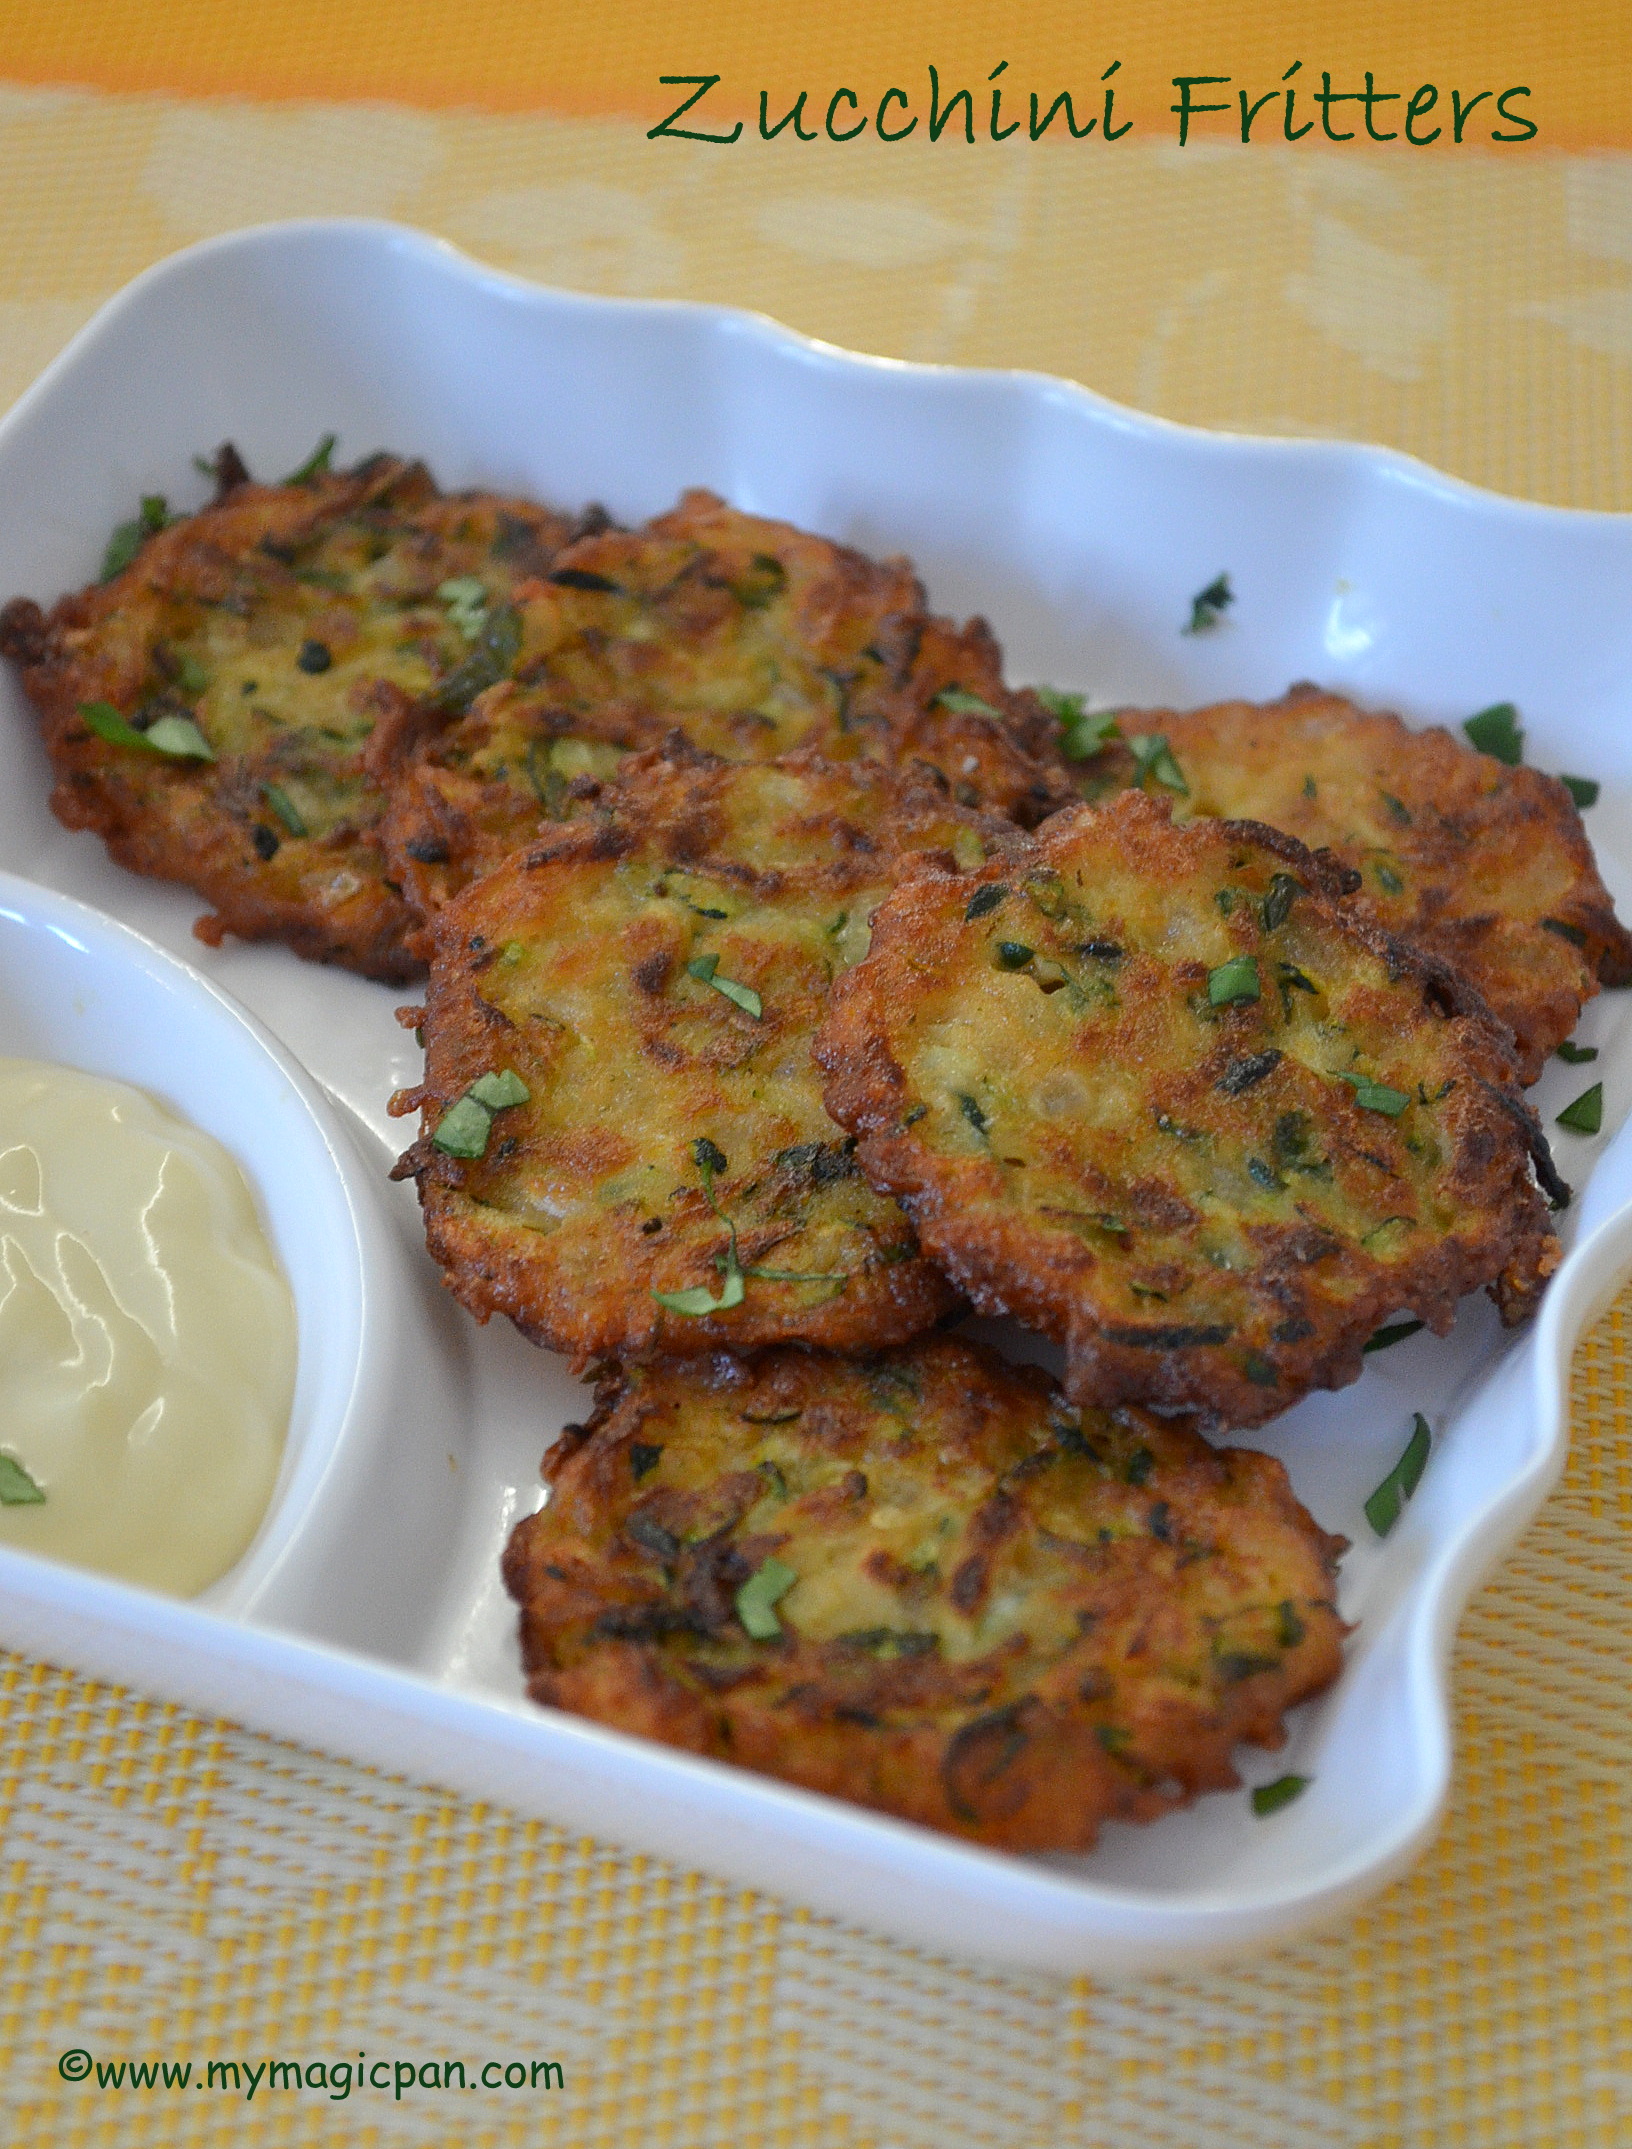 Zucchini Fritters – Courgette Fritters